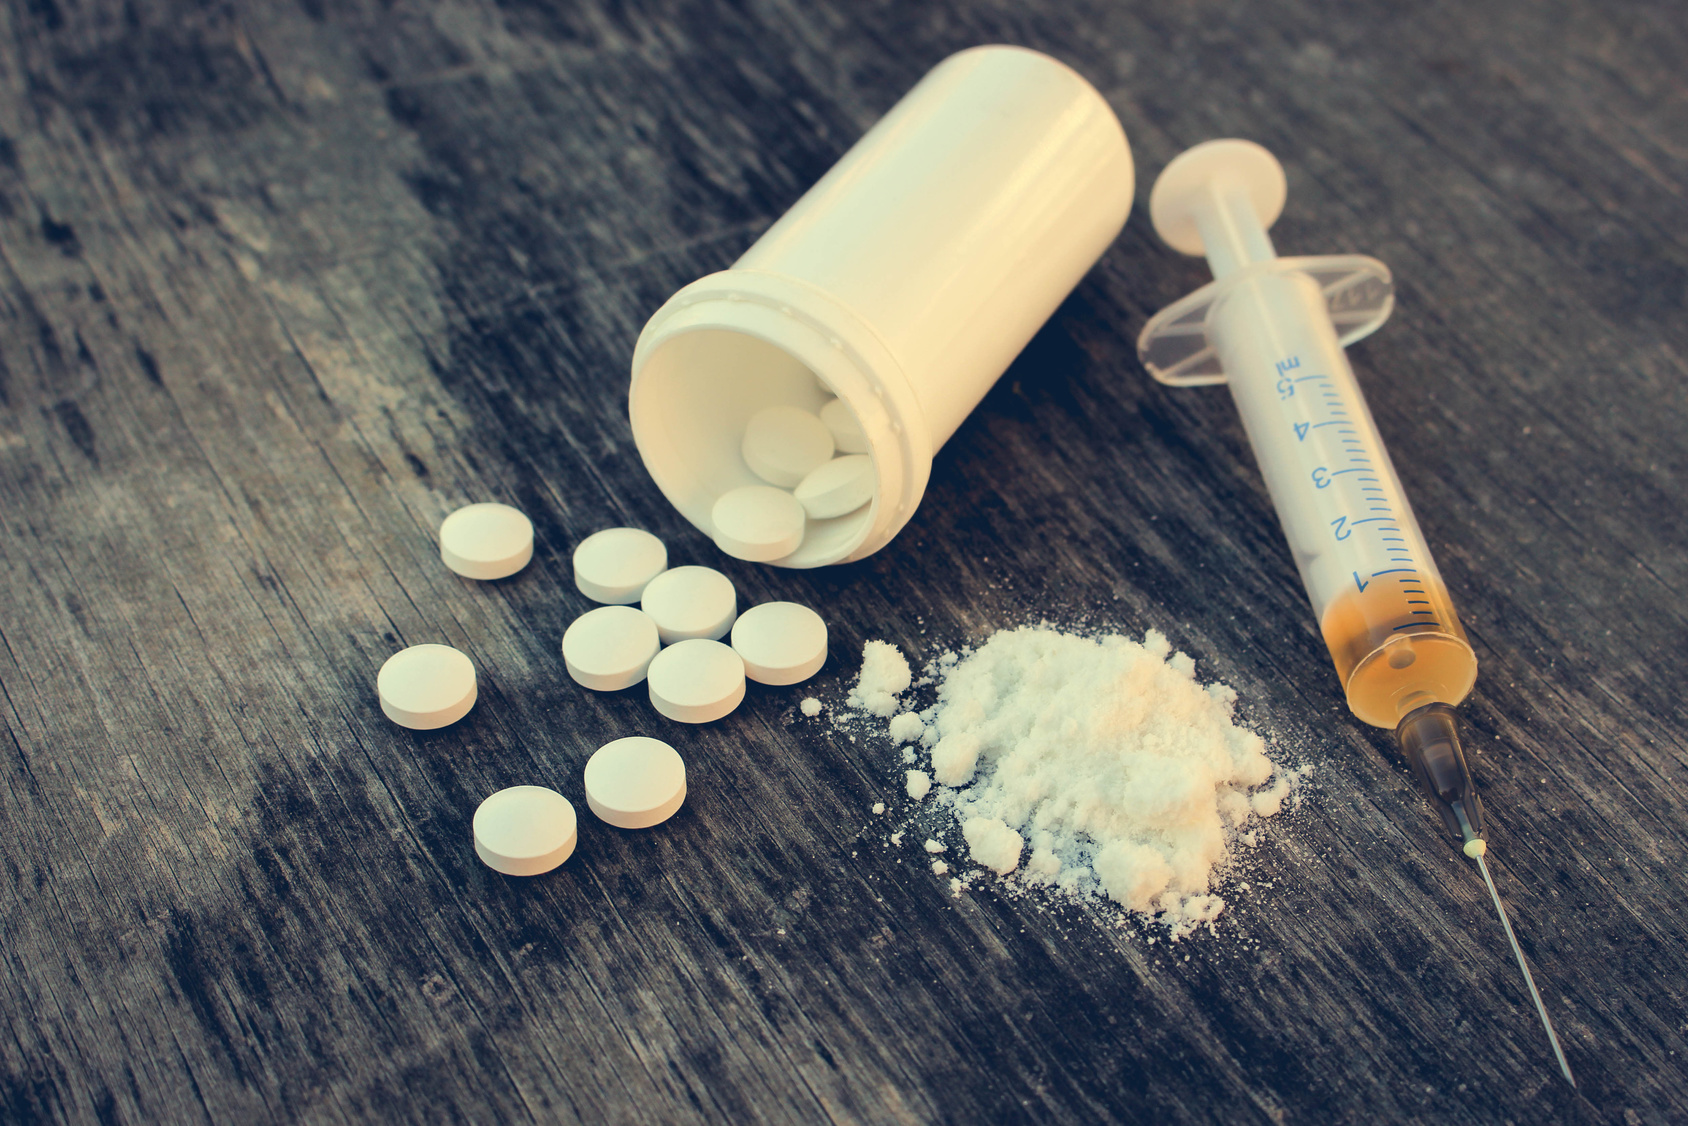 The Opioid Epidemic and Untreated Pain: Ethical Tensions